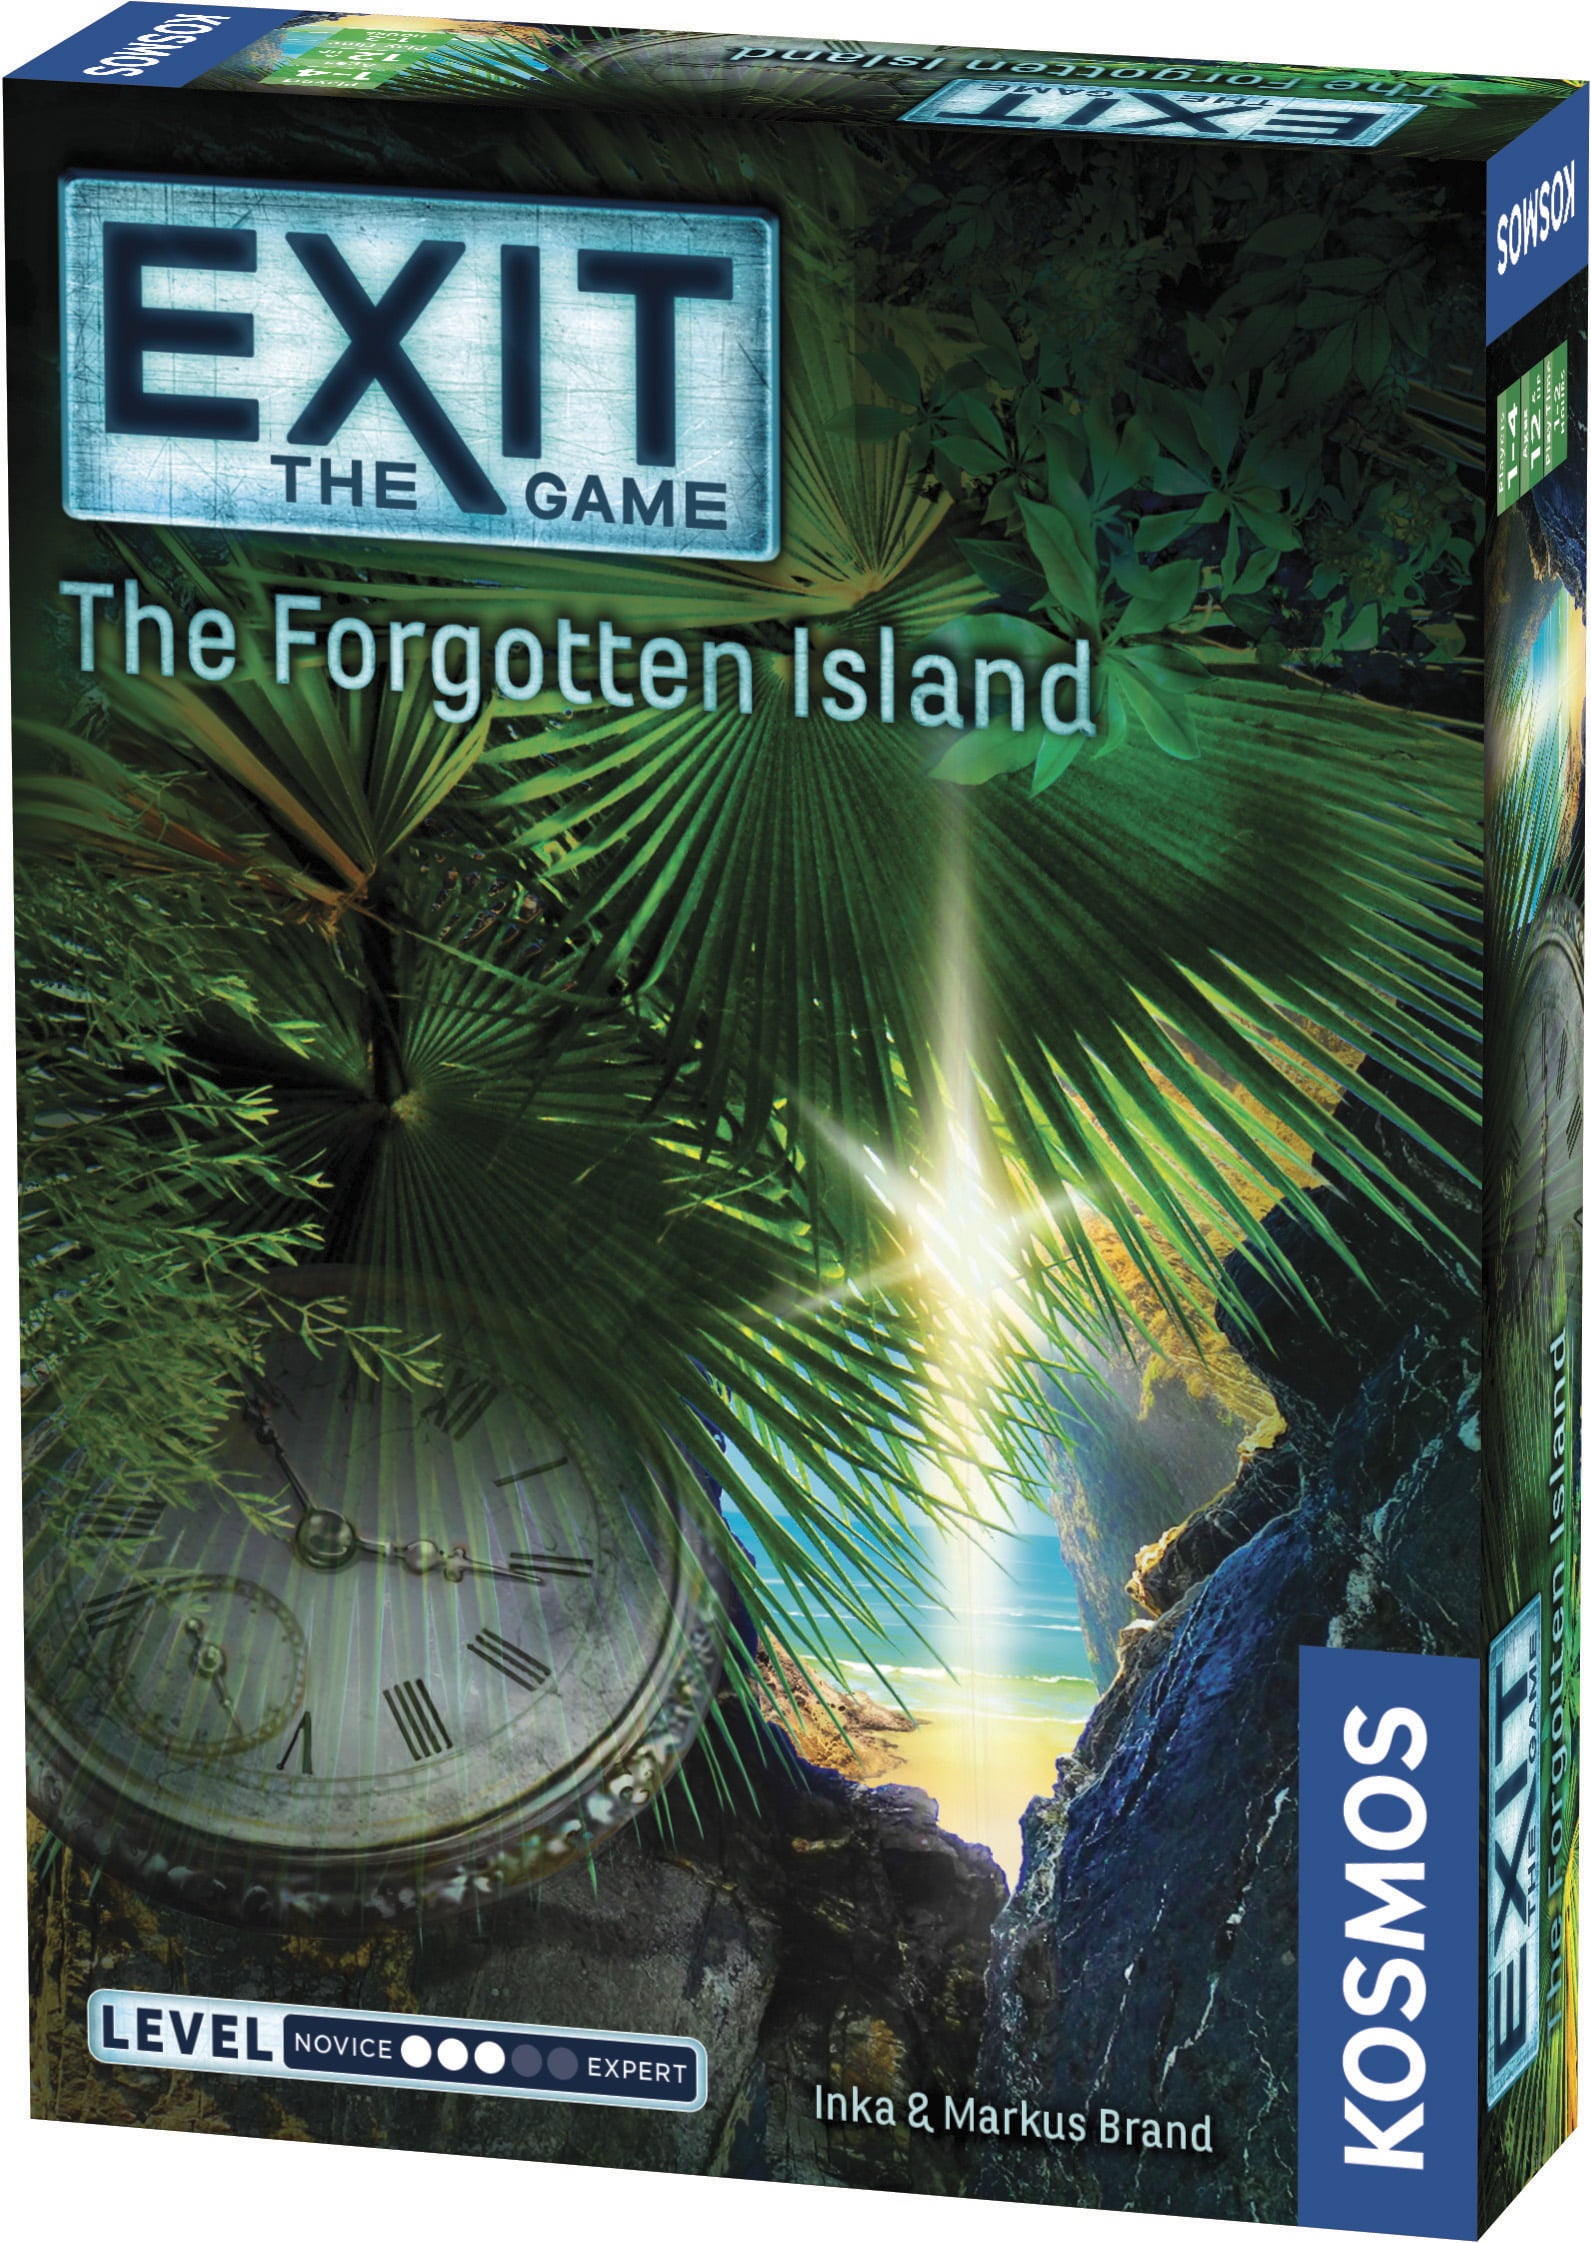 EXIT THE GAME: THE FORGOTTEN ISLAND | Play N Trade Winnipeg